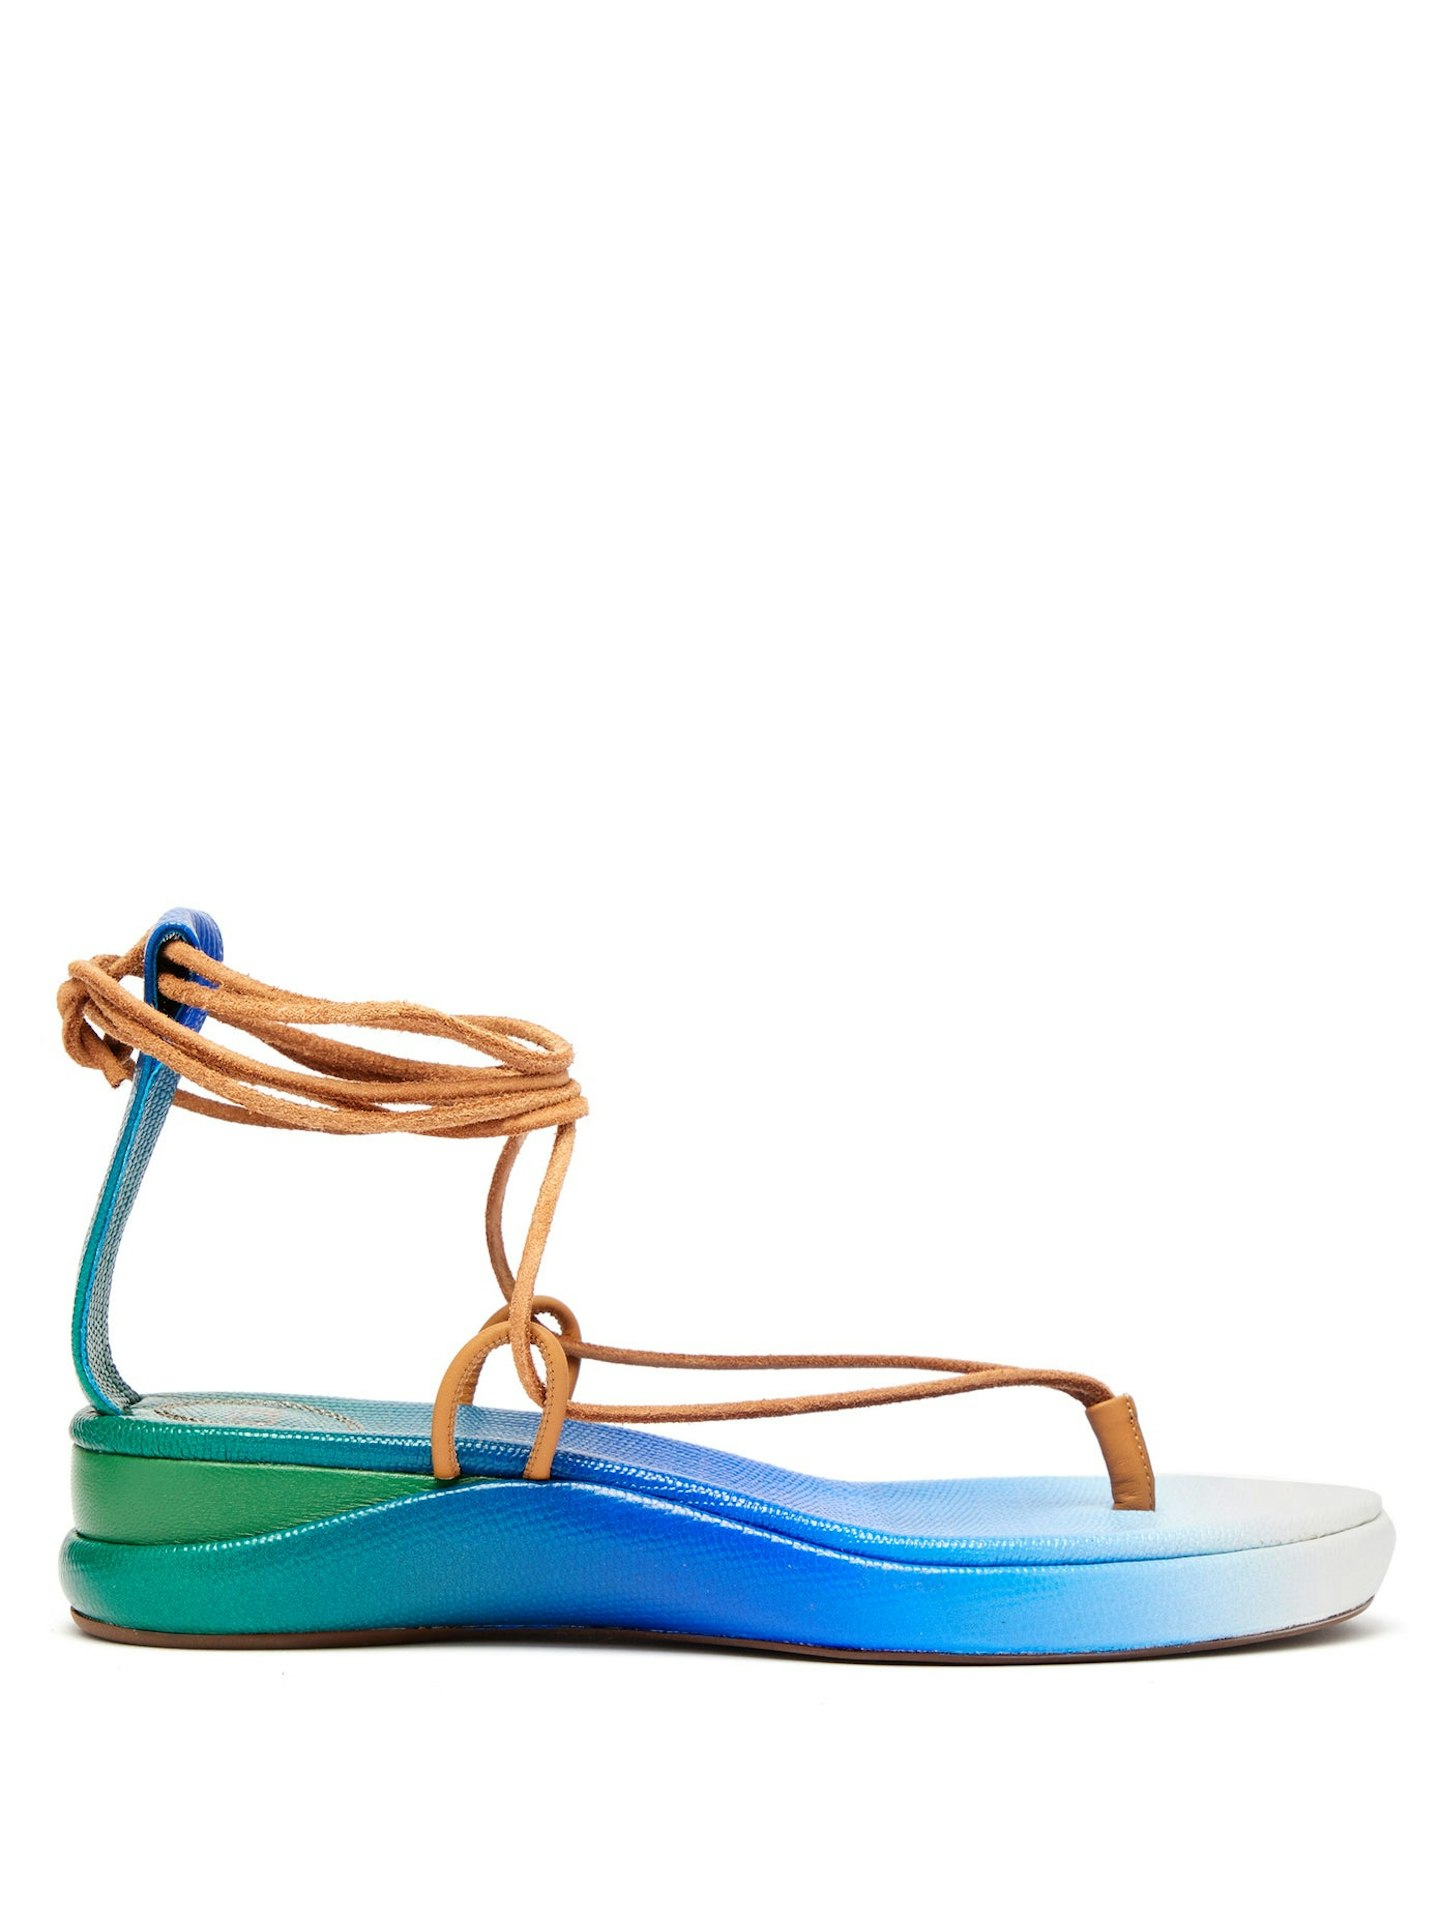 Chloe, Leather Sandals, WAS £495, NOW £198